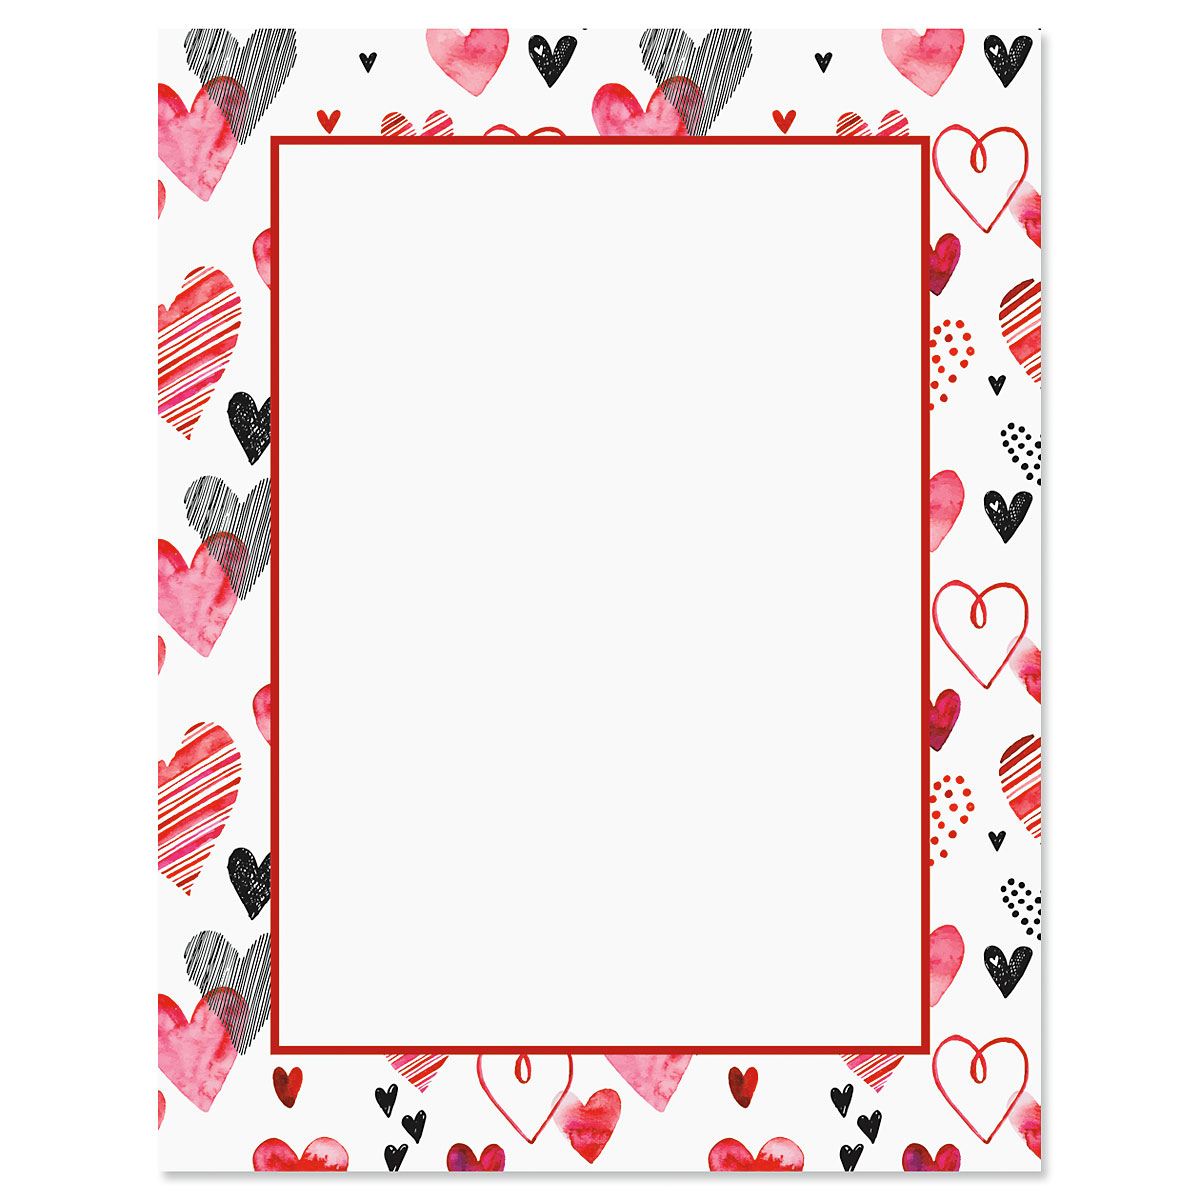 Seeds of Love Letter Papers - Set of 25 Valentine'stationery papers are 8  1/2 x 11, compatible computer paper, great for Weddings Announcements